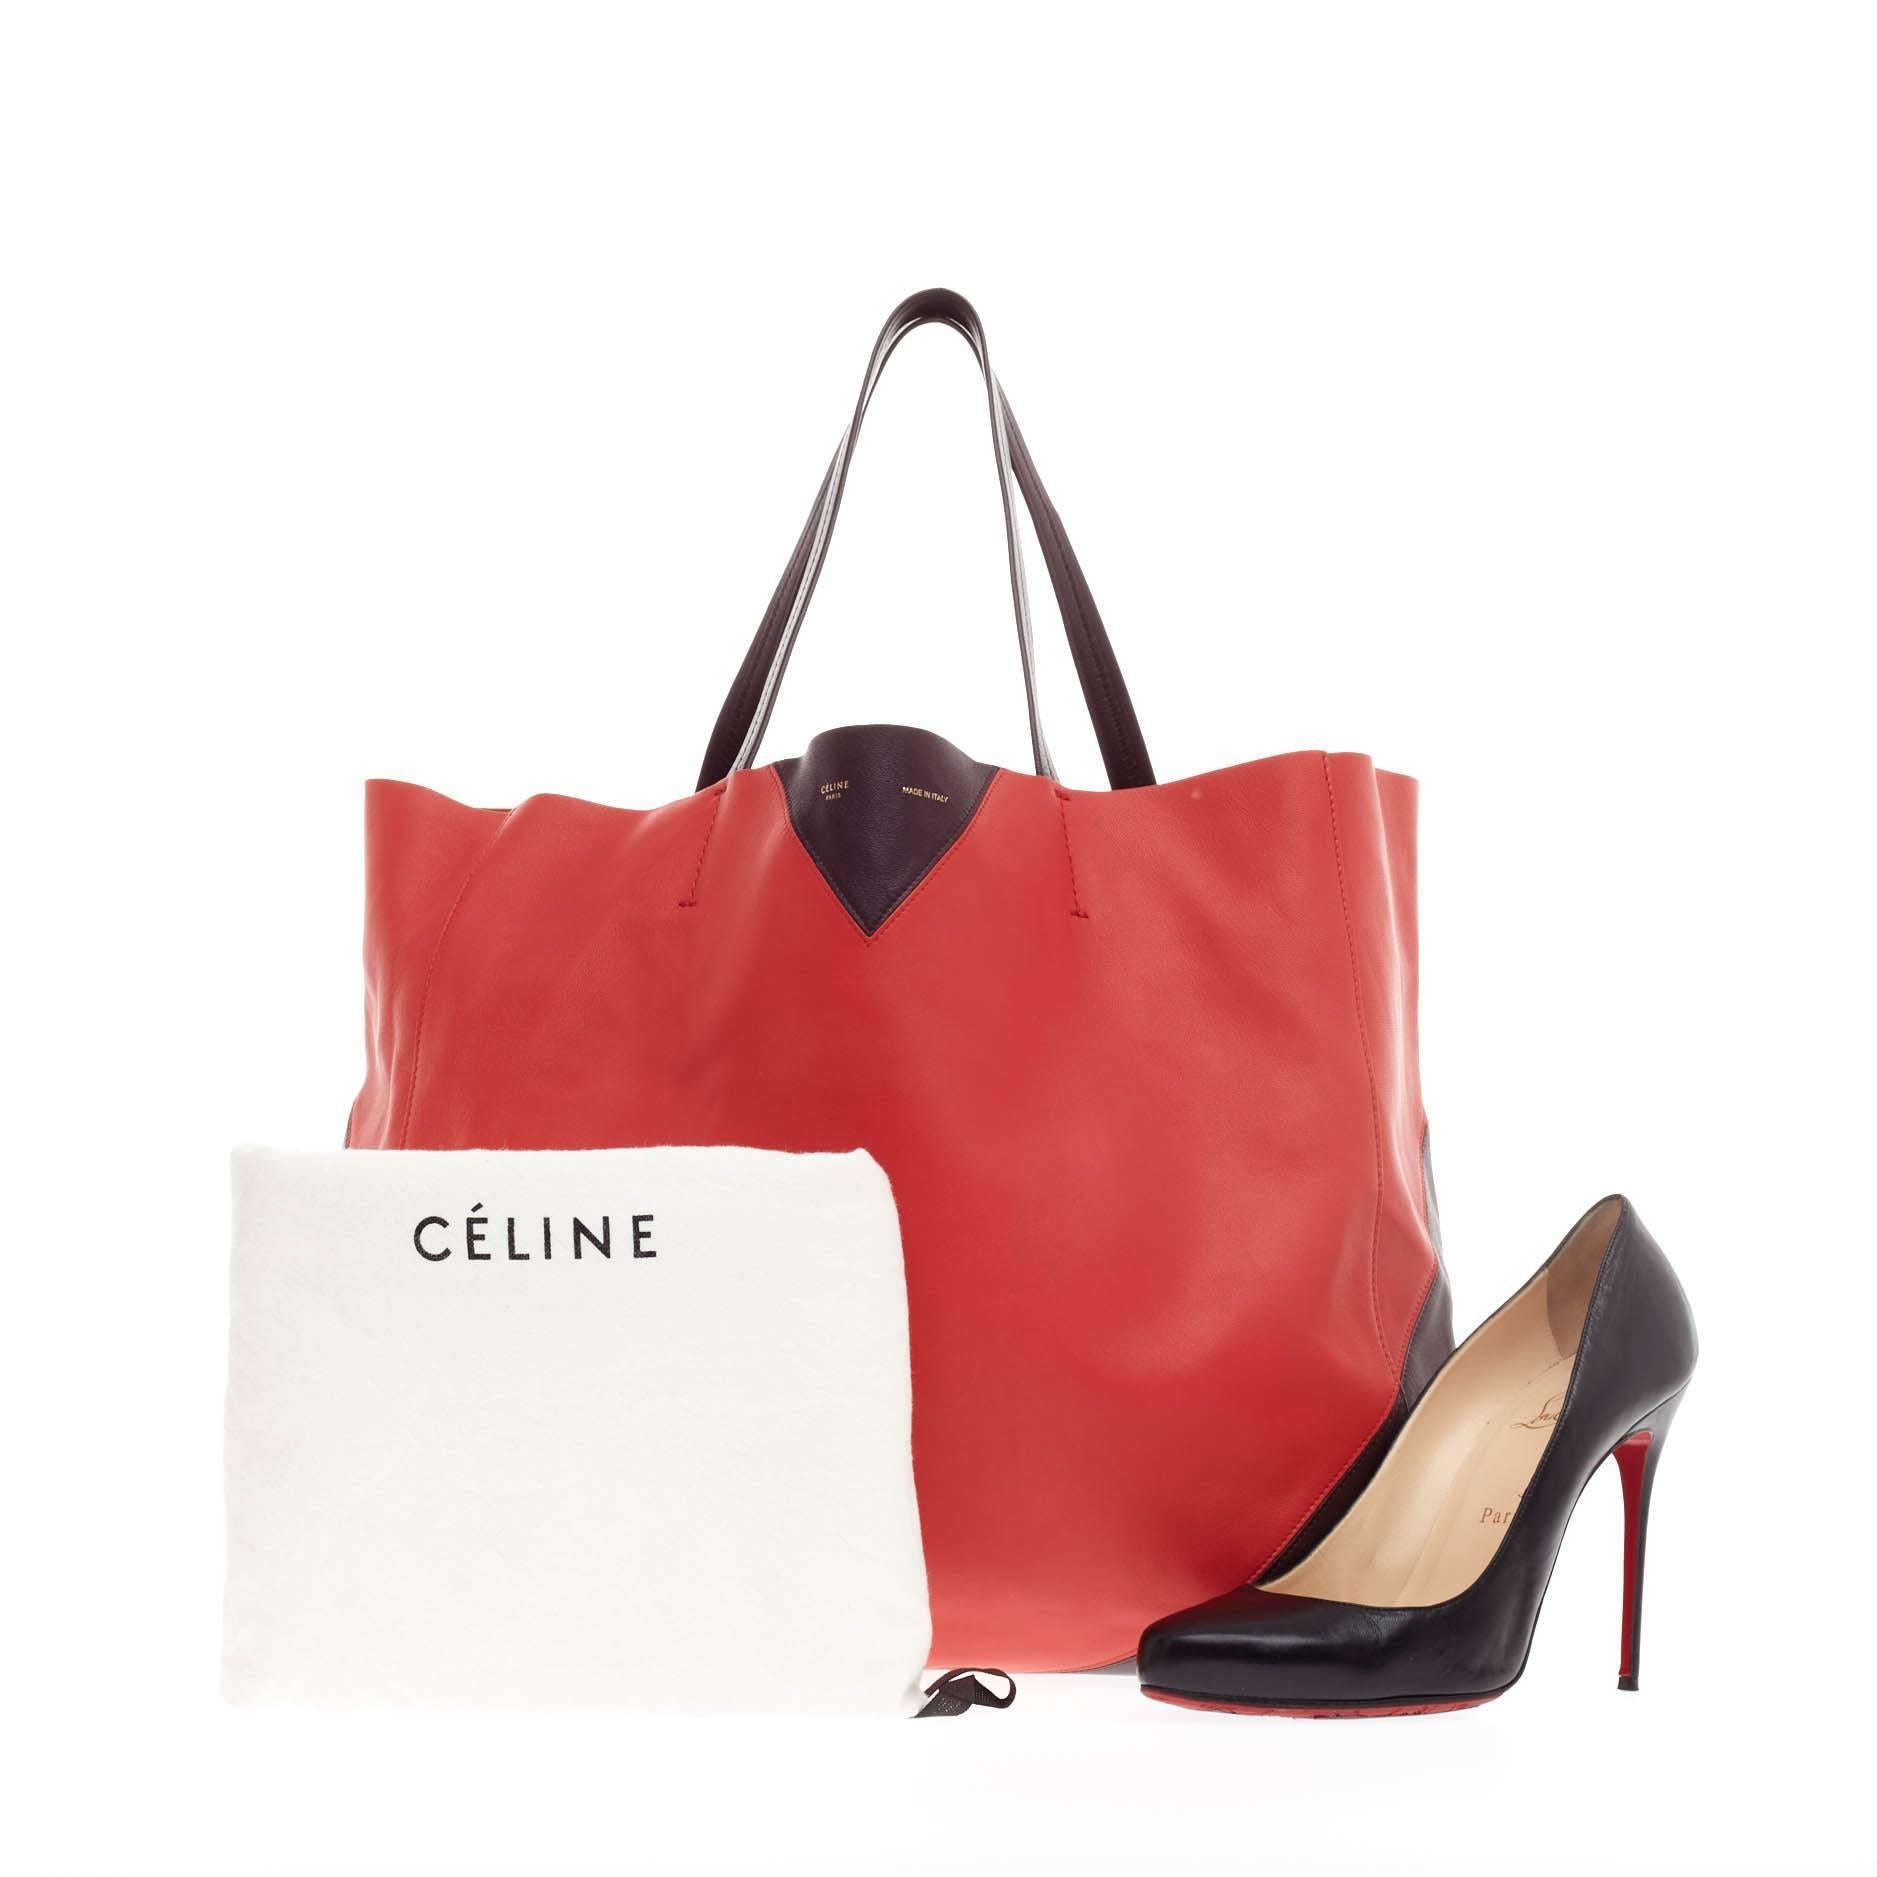 This authentic Celine Horizontal Cabas Tote Leather Large is the perfect oversized travel companion to fit all your essentials and more. Crafted in eye-catching red and brown leather in a minimalist chevron design, this no-fuss tote features dual